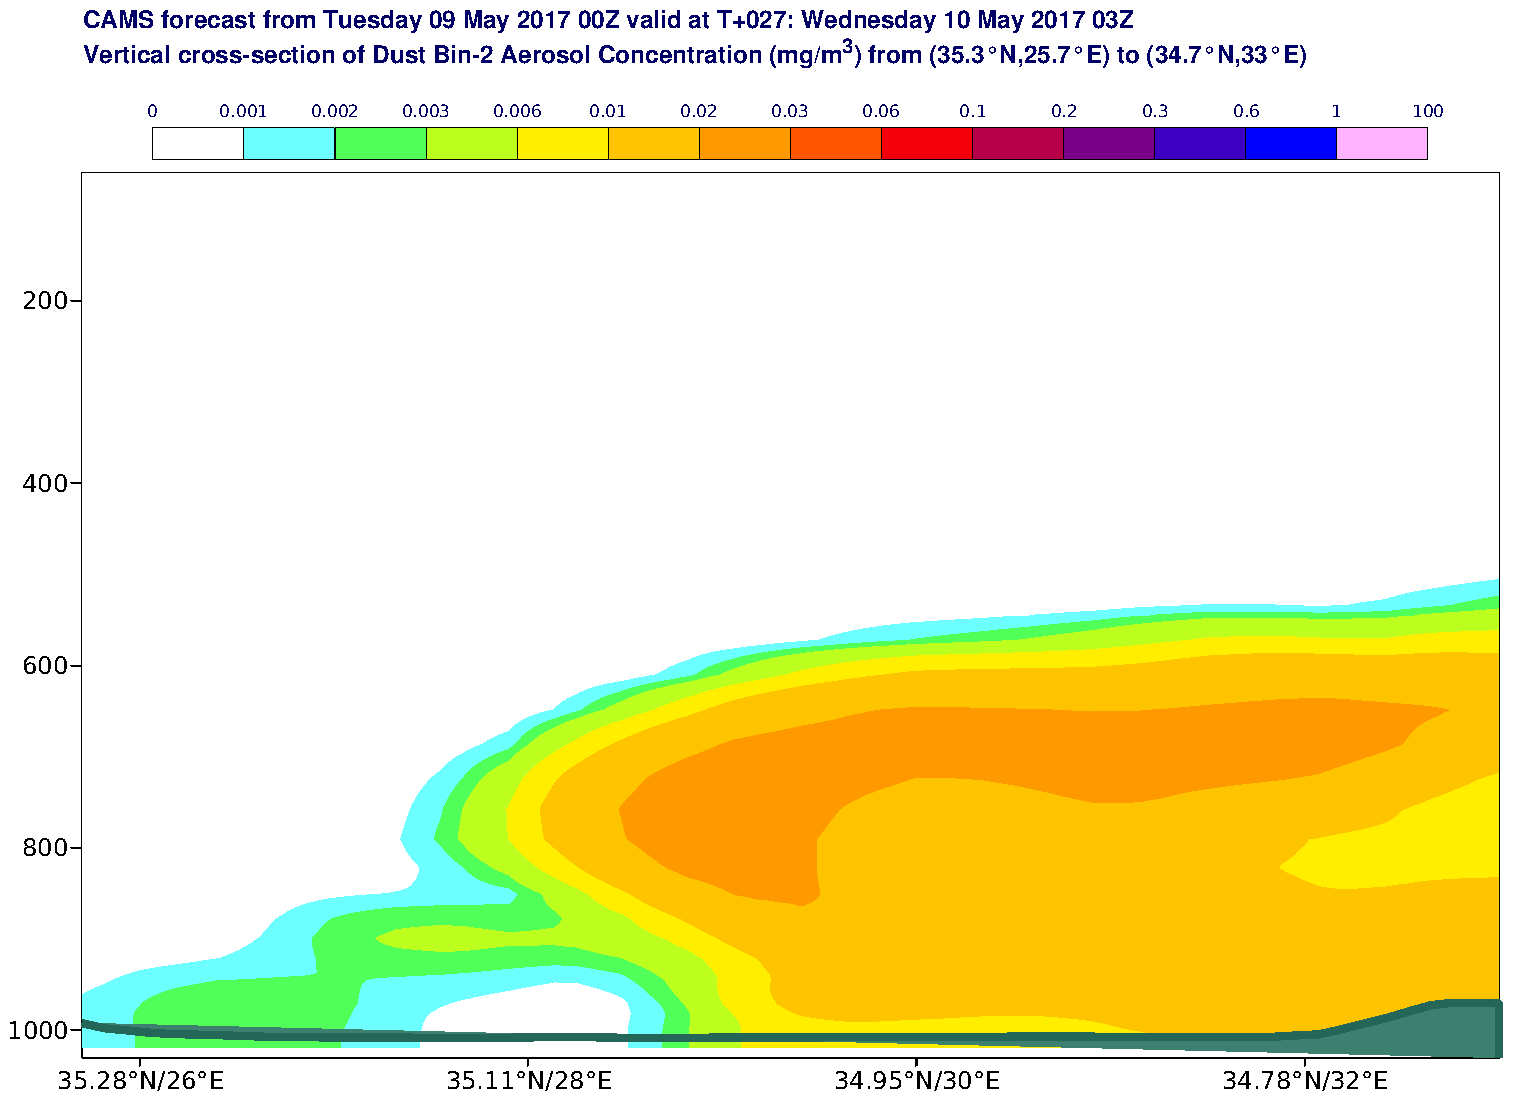 Vertical cross-section of Dust Bin-2 Aerosol Concentration (mg/m3) valid at T27 - 2017-05-10 03:00